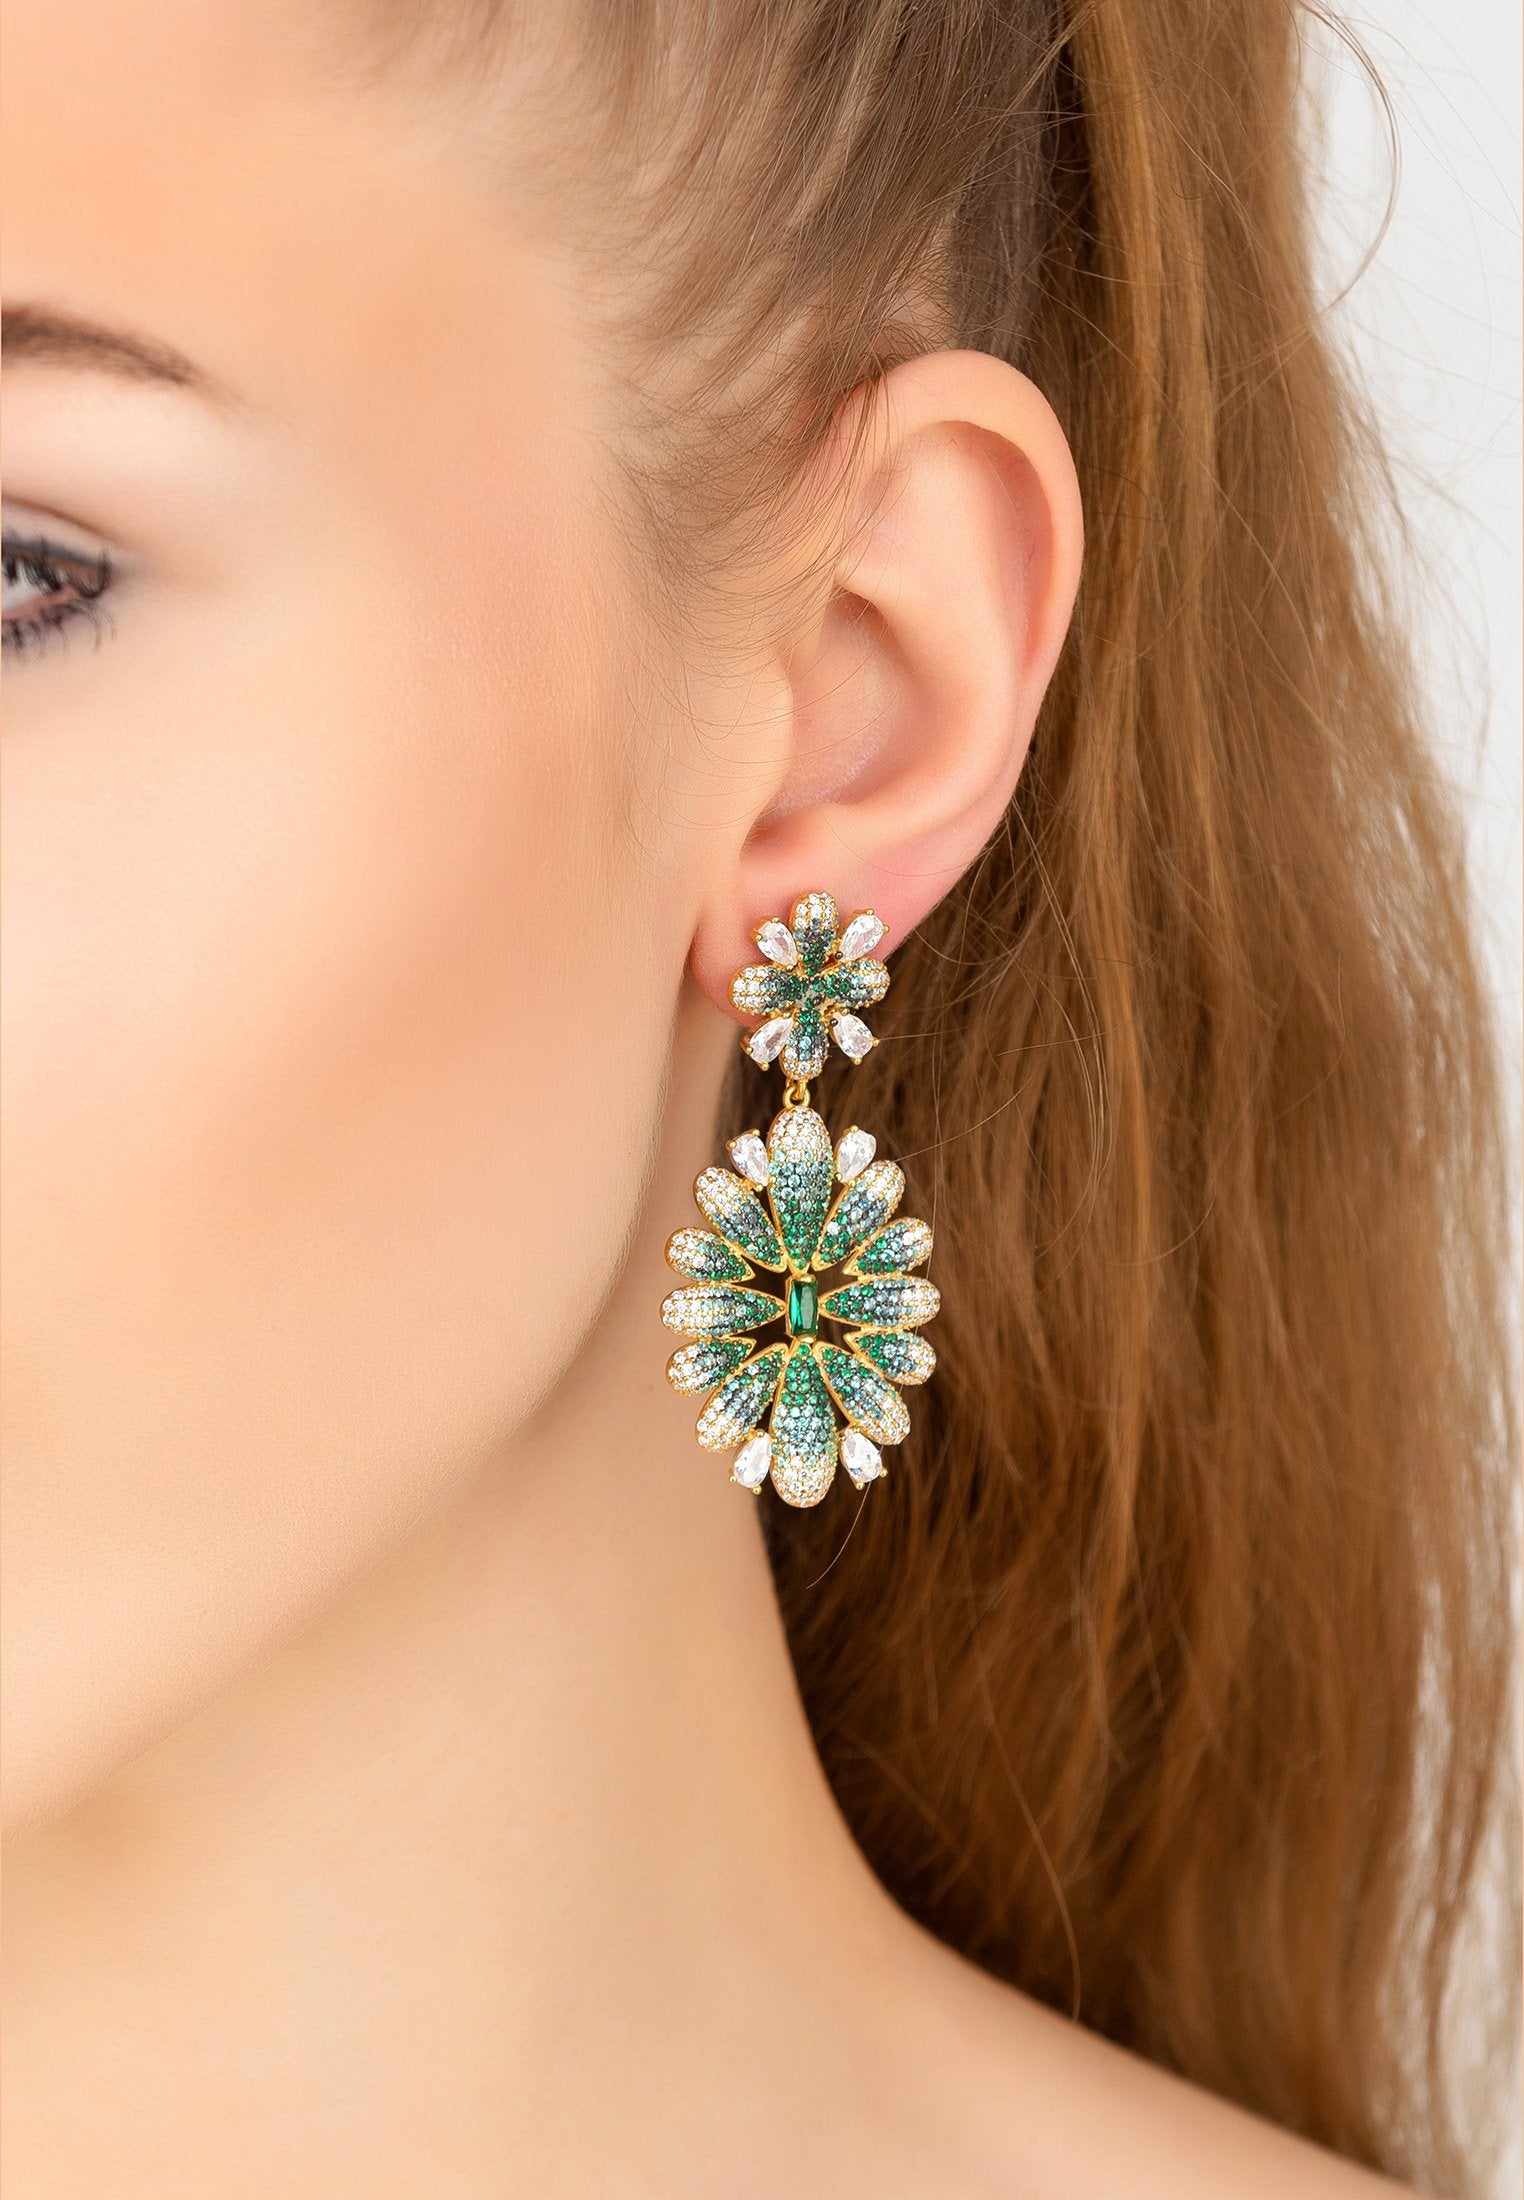 Luxurious Babylon Flower Statement Earrings in Gold and Green Gemstones - Perfect for Bridal and Evening Wear - Jewelry & Watches - Bijou Her -  -  - 